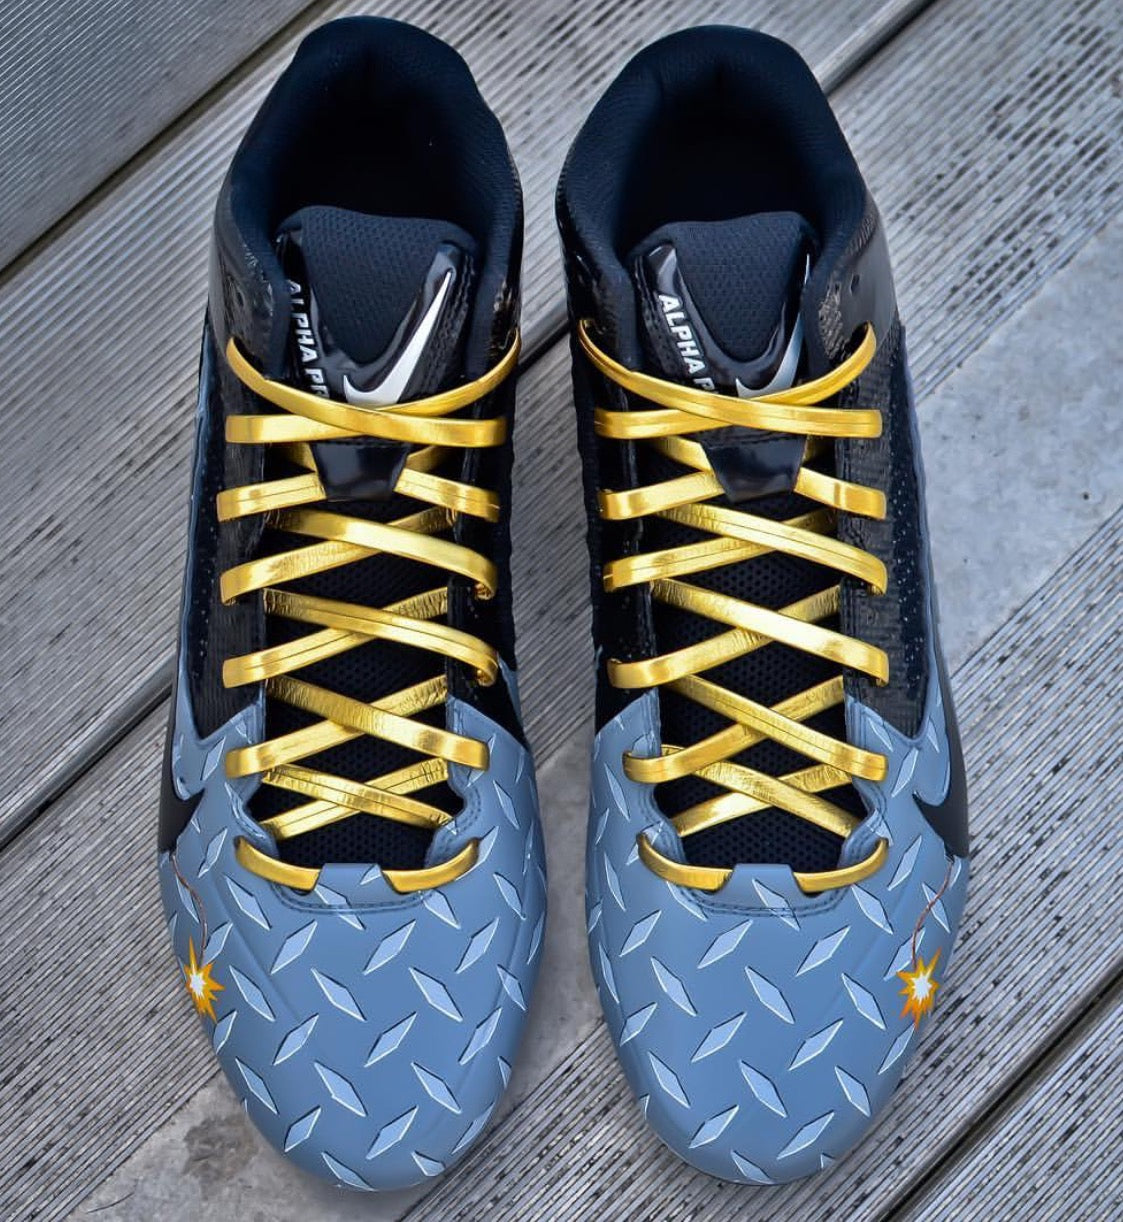 yellow gold shoelaces